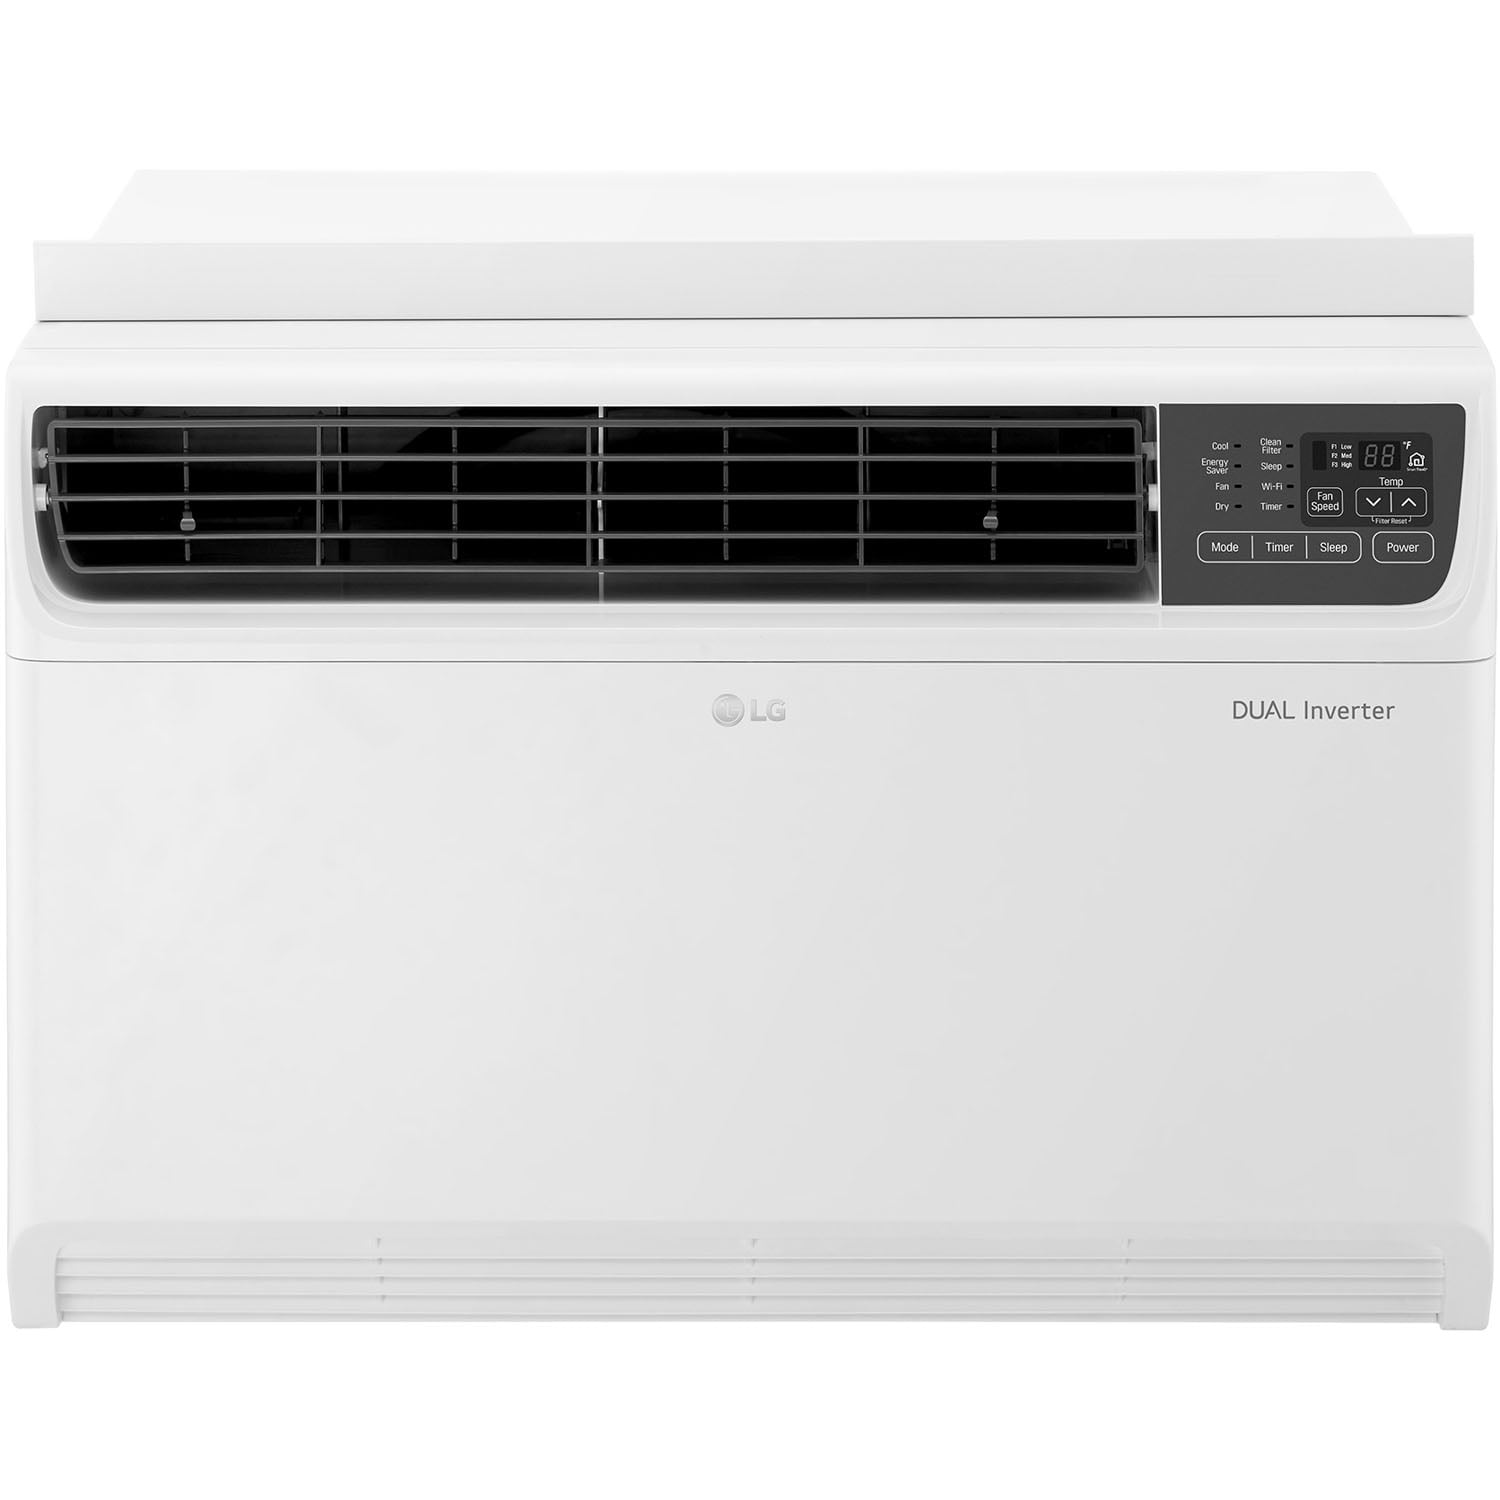 Photo 1 of (DOES NOT FUNCTION)LG Electronics 18,000 BTU 230V Dual Inverter Window Air Conditioner with Wi-Fi Control
**UNABLE TO TEST POWER CORD**